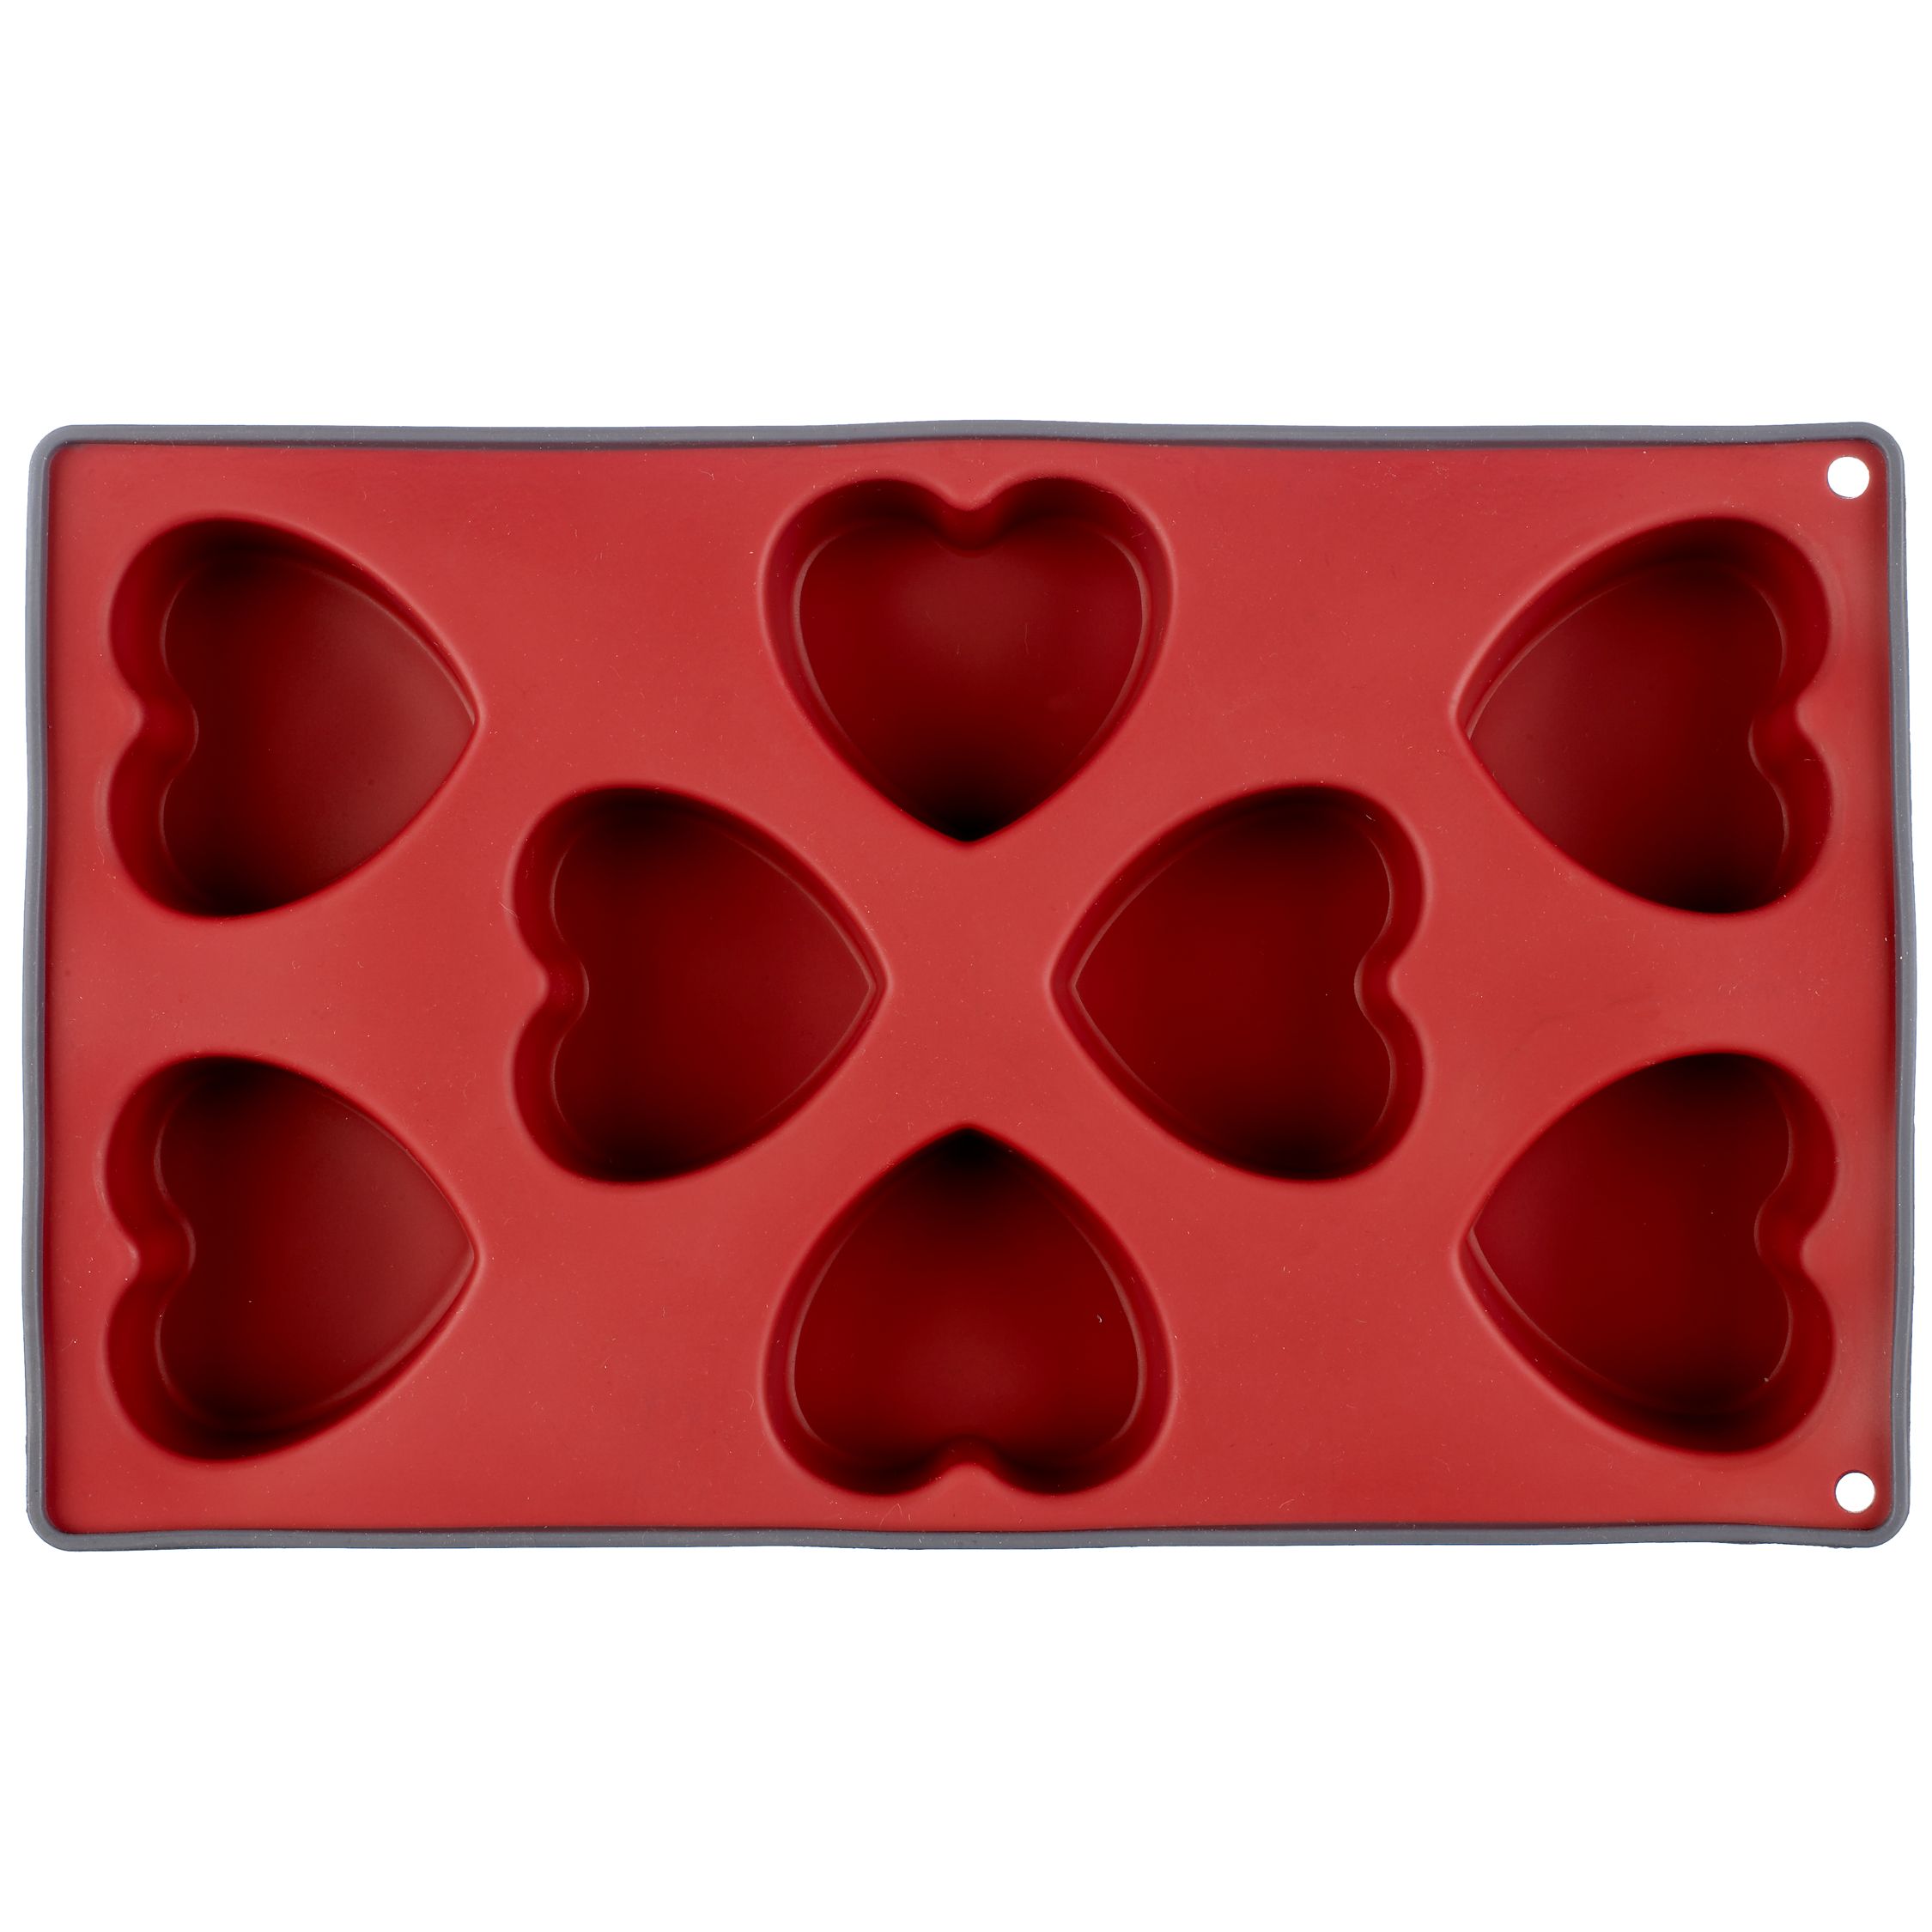 John Lewis Heart 6 Cup Cake Mould, Red